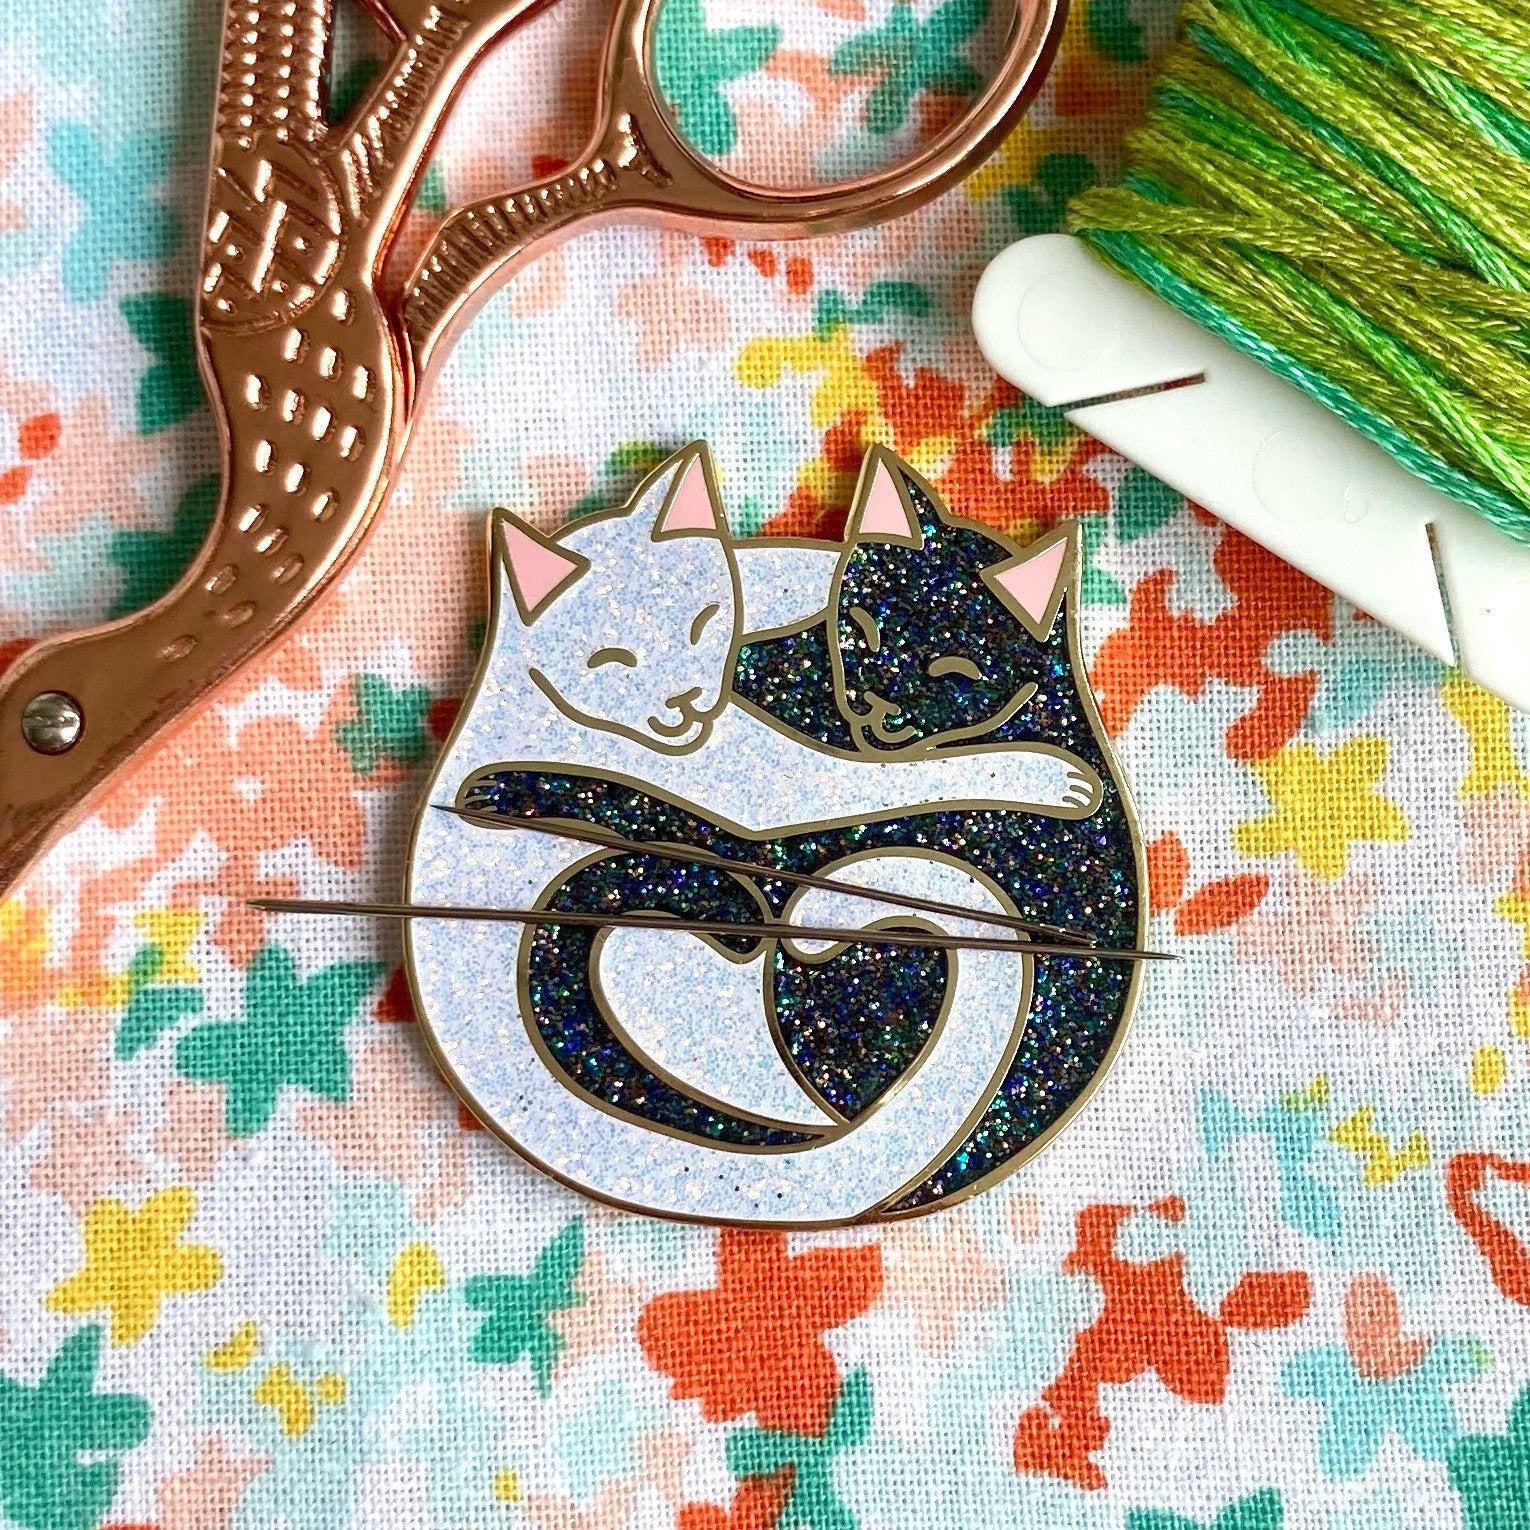 Magnetic Needleminder - Cuddling Cats Black and White Glitter Hard Enamel Pin Converted to Needle Minder with Very Strong Neodymium Magnets